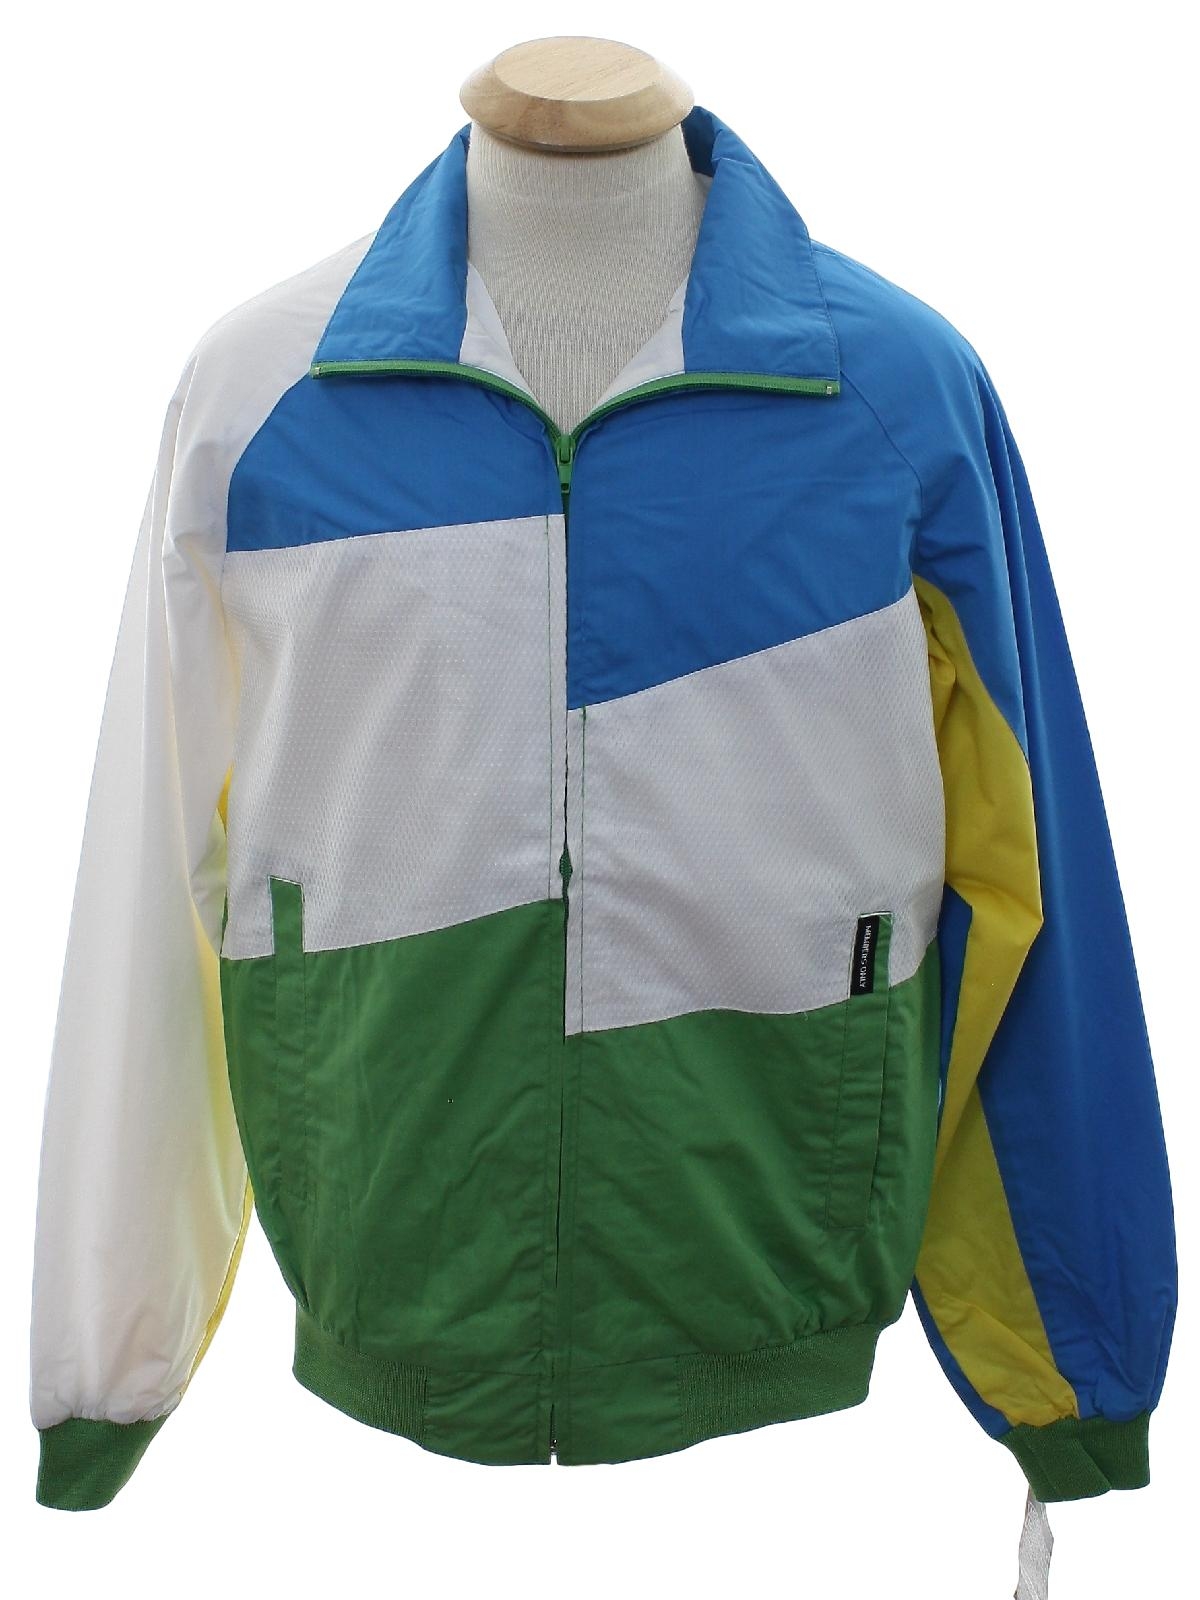 Vintage 80s Blue Members Only Jacket. Breathable and